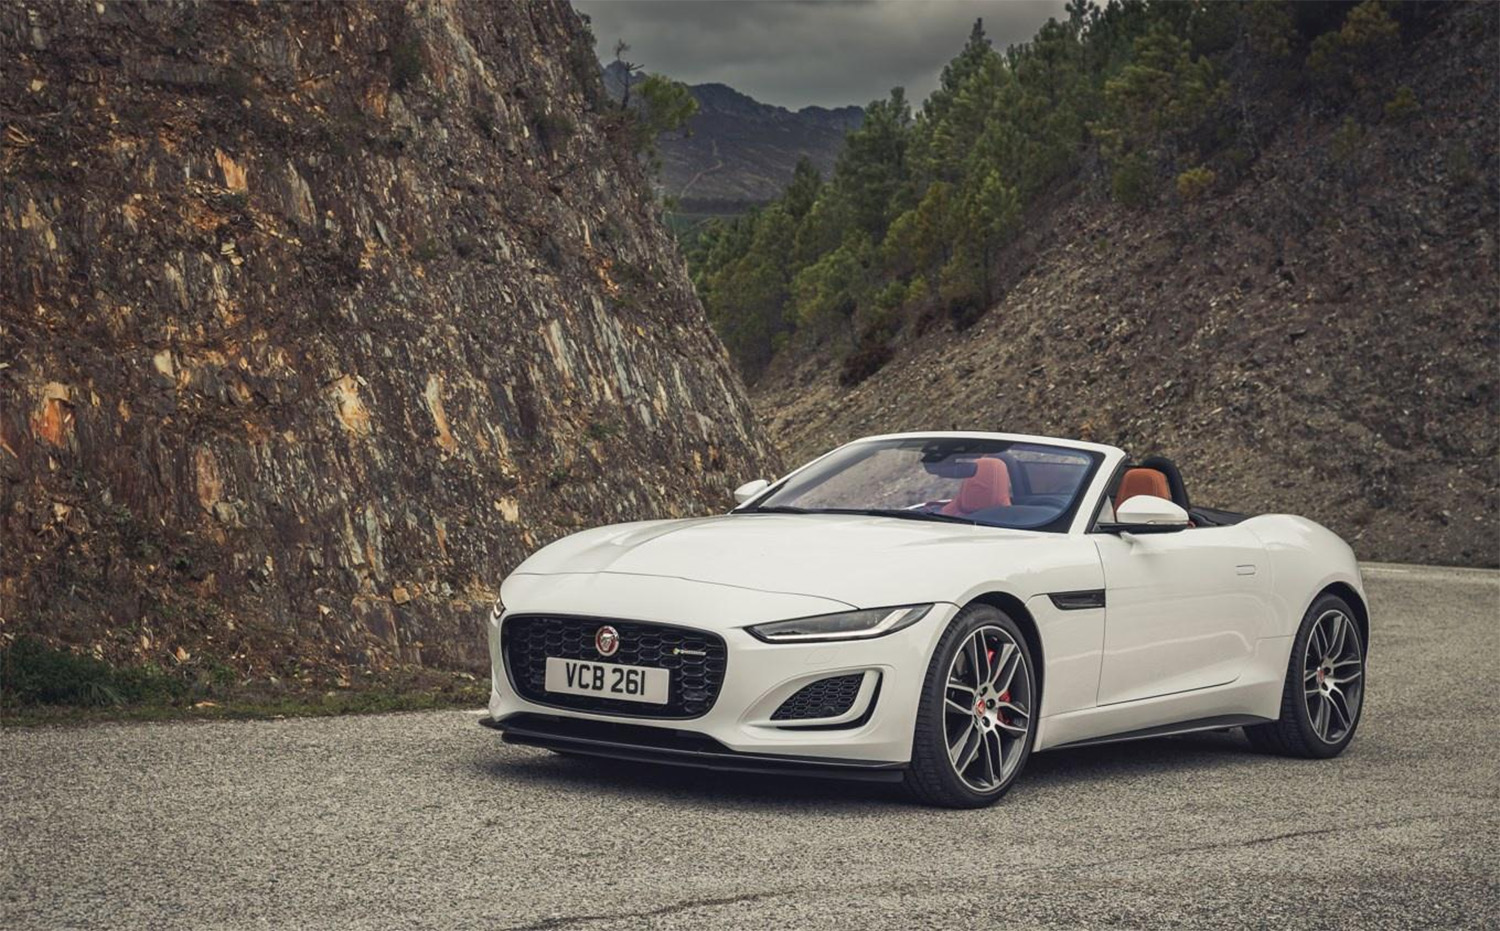 Jaguar F-Type Convertible top down on mountain road displaying front driver angle